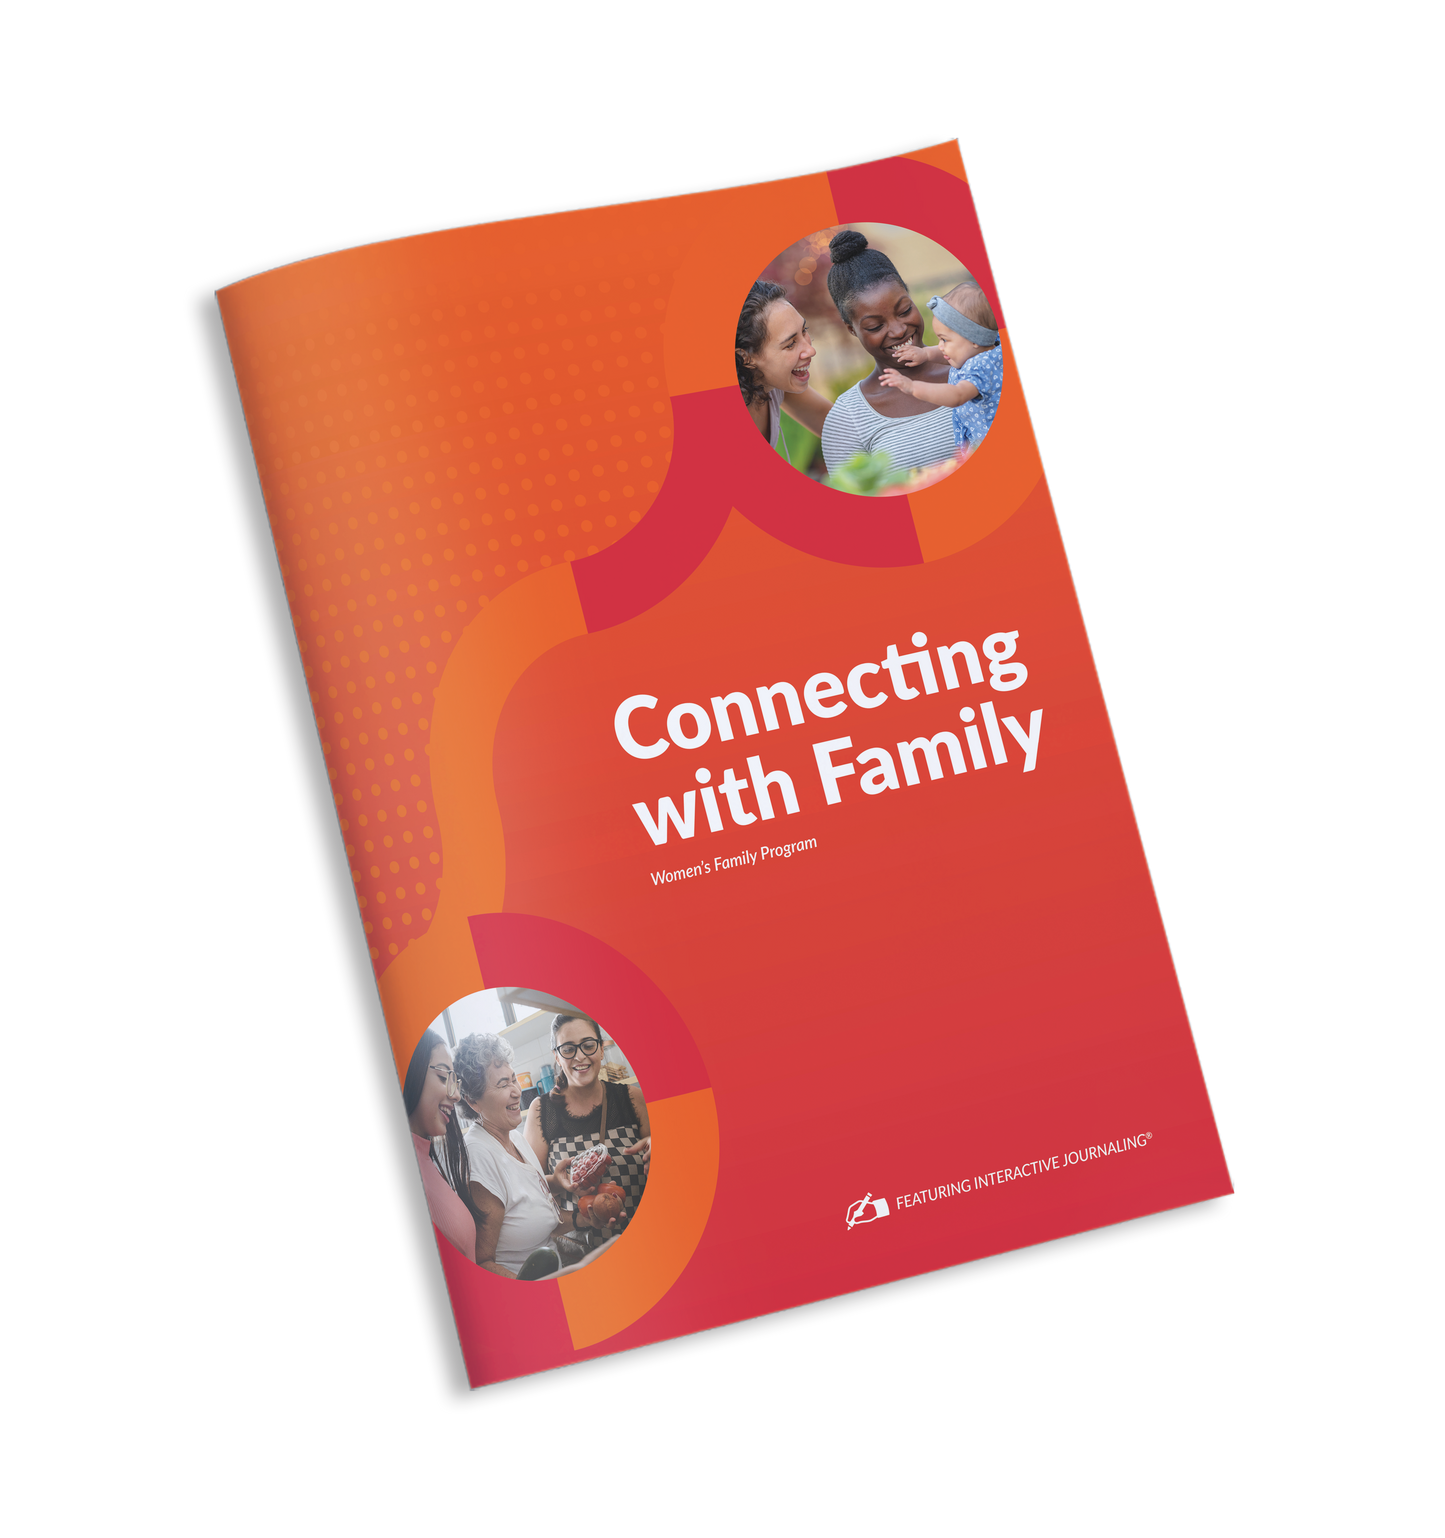 Family Program (Prison-specific) - Women's Connecting with Family Journal